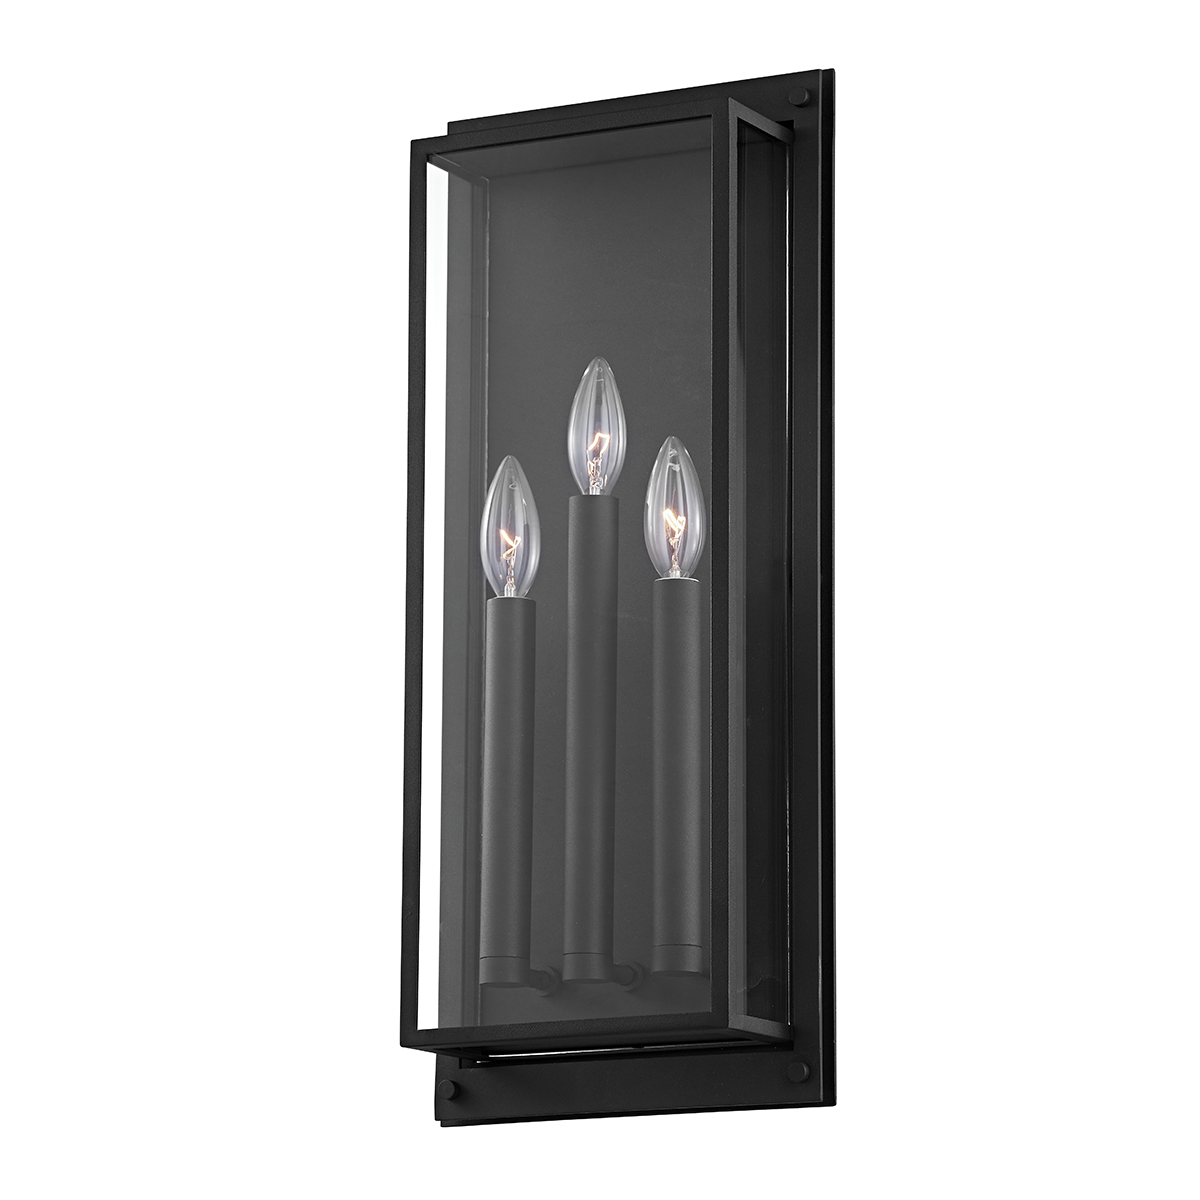 Troy WINSLOW 1 LIGHT LARGE EXTERIOR WALL SCONCE B9103 Outdoor l Wall Troy Lighting TEXTURE BLACK  